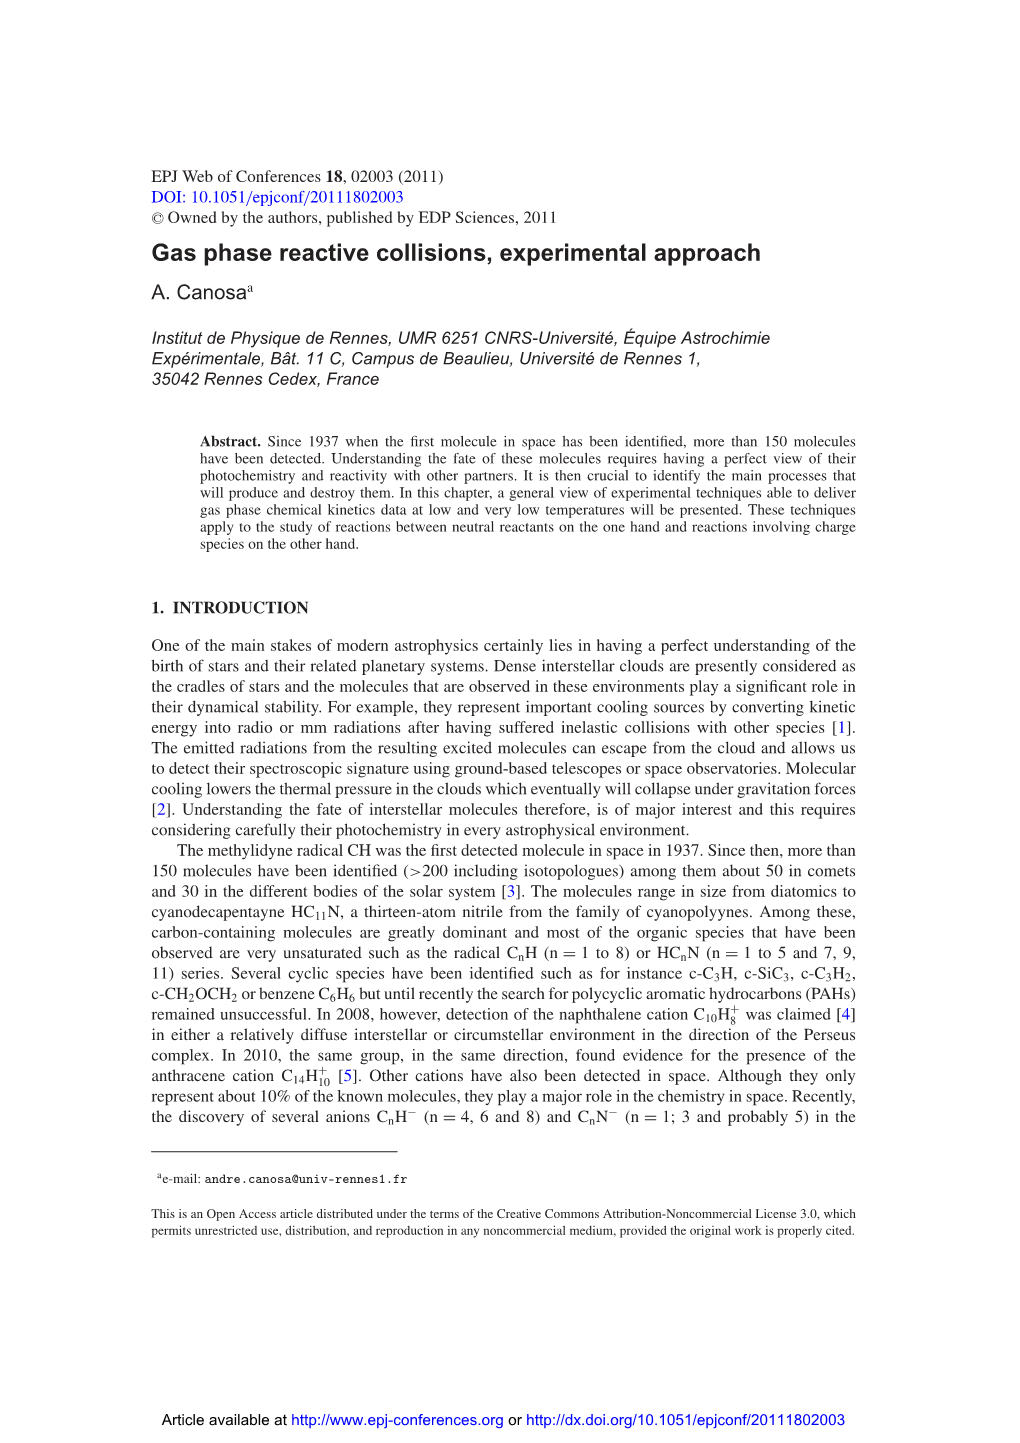 Gas Phase Reactive Collisions, Experimental Approach